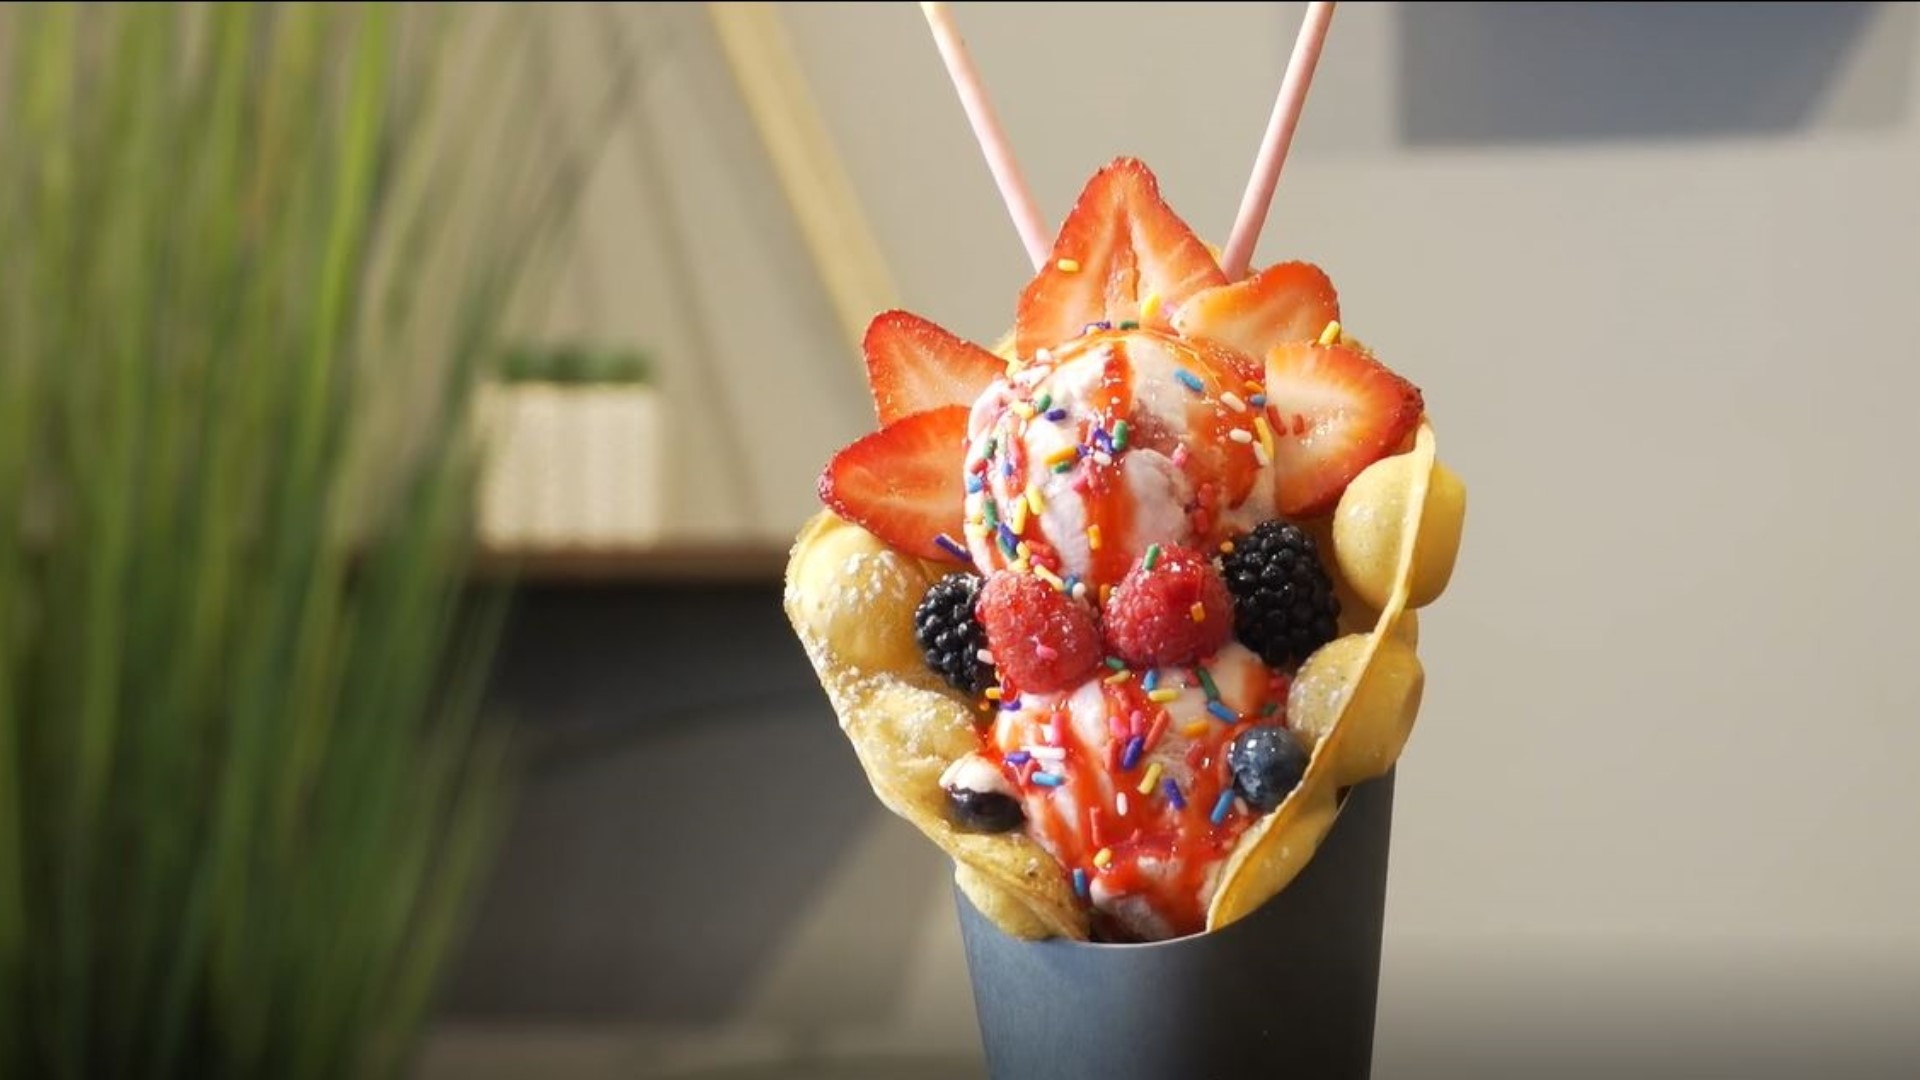 From Korean hot dogs to a decadent dessert cafe, the Snohomish County town has plenty to offer for savory and sweet fans. #k5evening